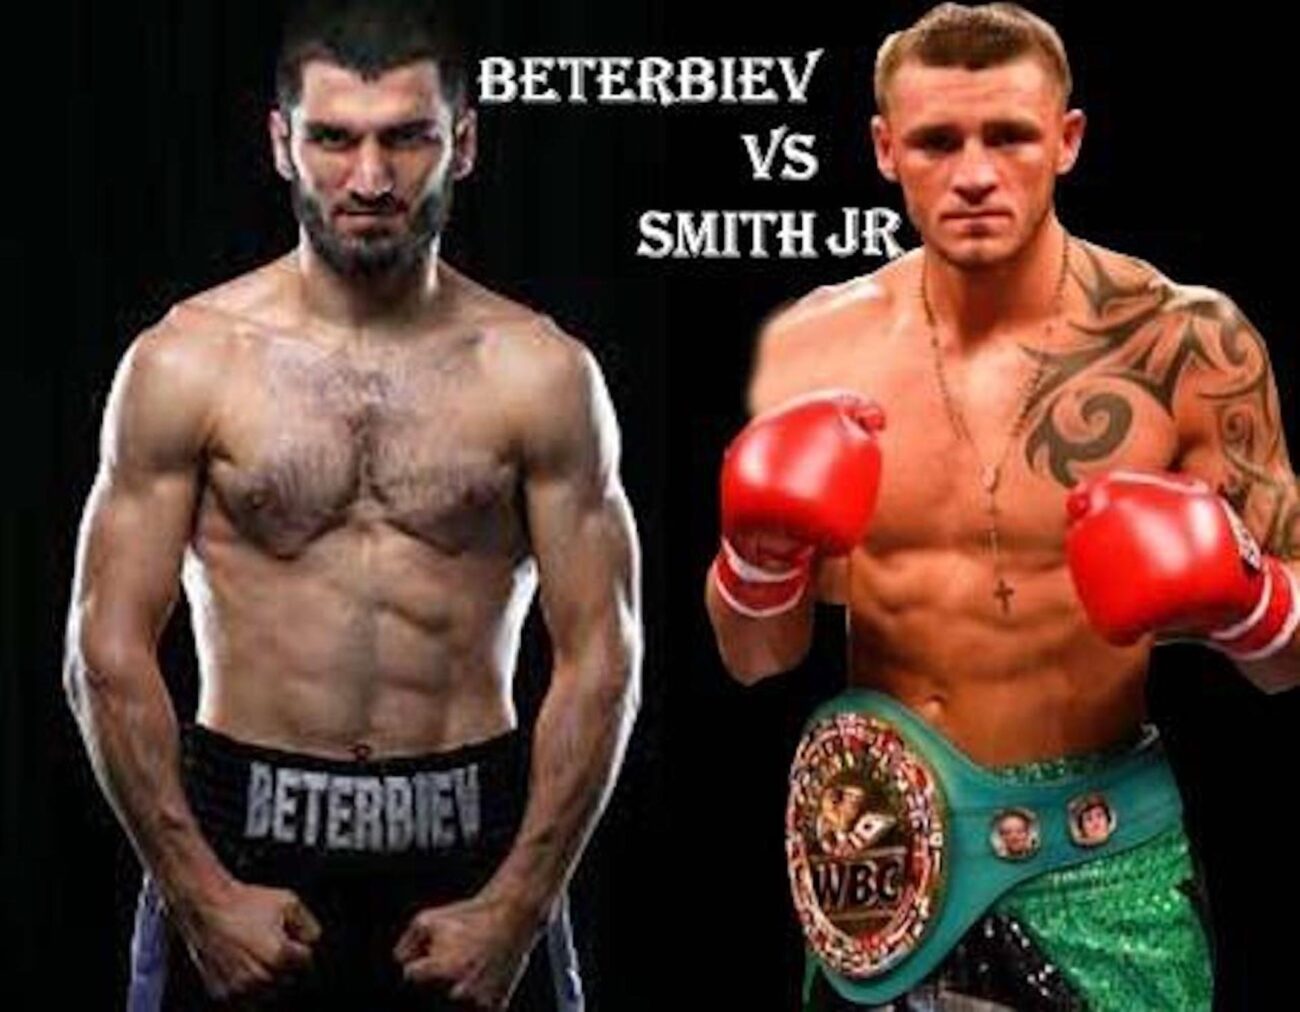 Box fans! Here's how to stream Artur Beterbiev vs Joe Smith Jr. face off at Madison Square Garden this Saturday, June 18.